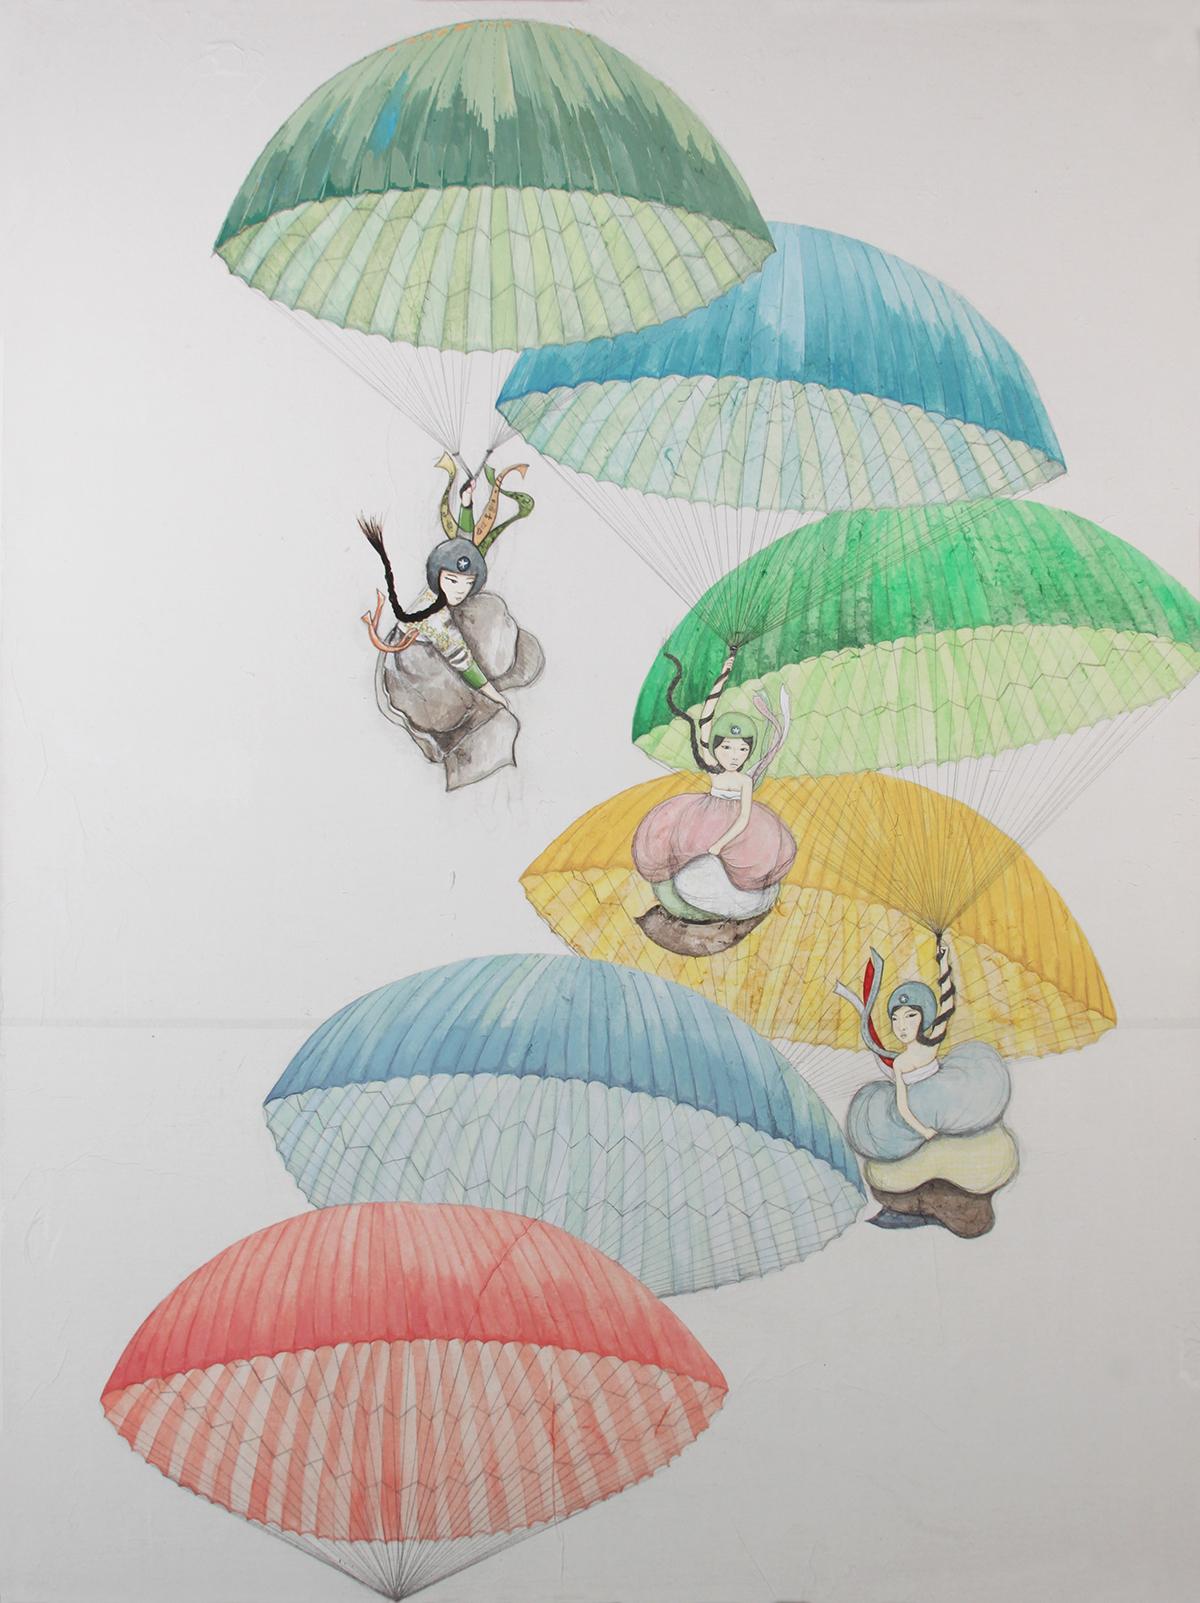 Artwork by Kyung Jeon titled Parachutes Hanboks and Helmets, 2013, Watercolor, gouache, pencil on Hanji paper/canvas, 40 x 30 inches, 101.6 x 76.2 cm